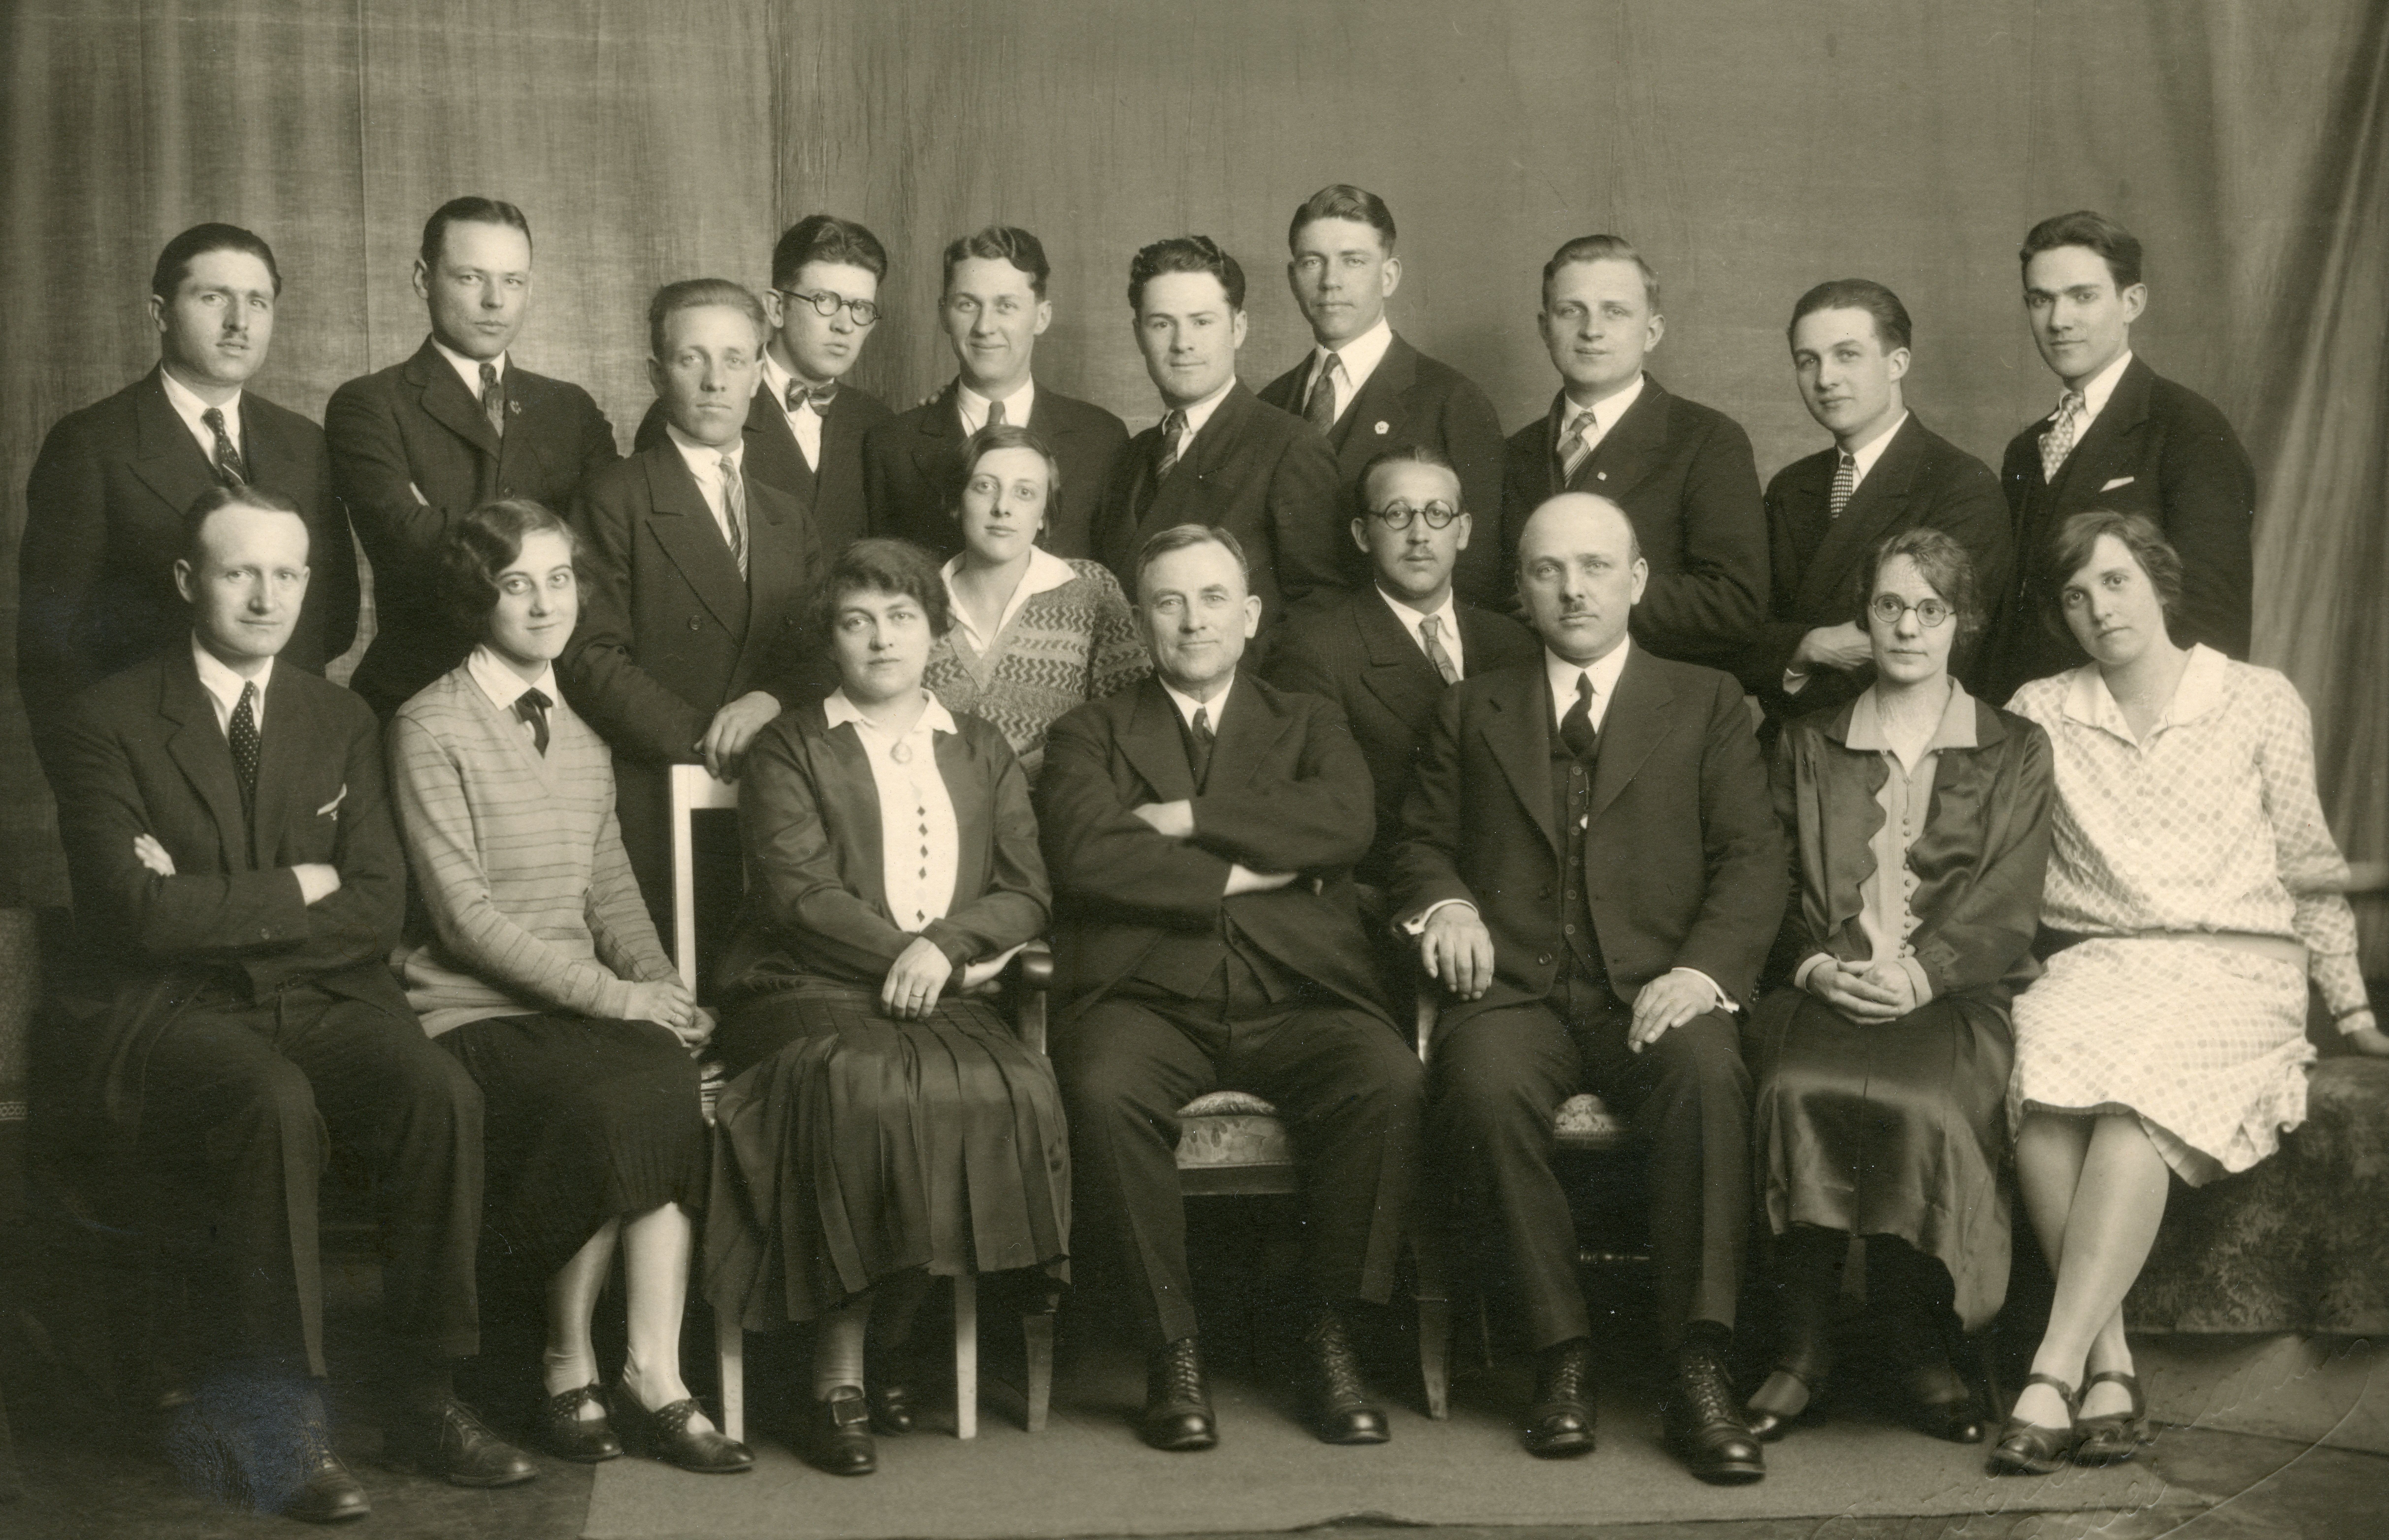 Mission Presidents Hugh Jenne Cannon and Friedrich Tadje and missionaries, ca 1925